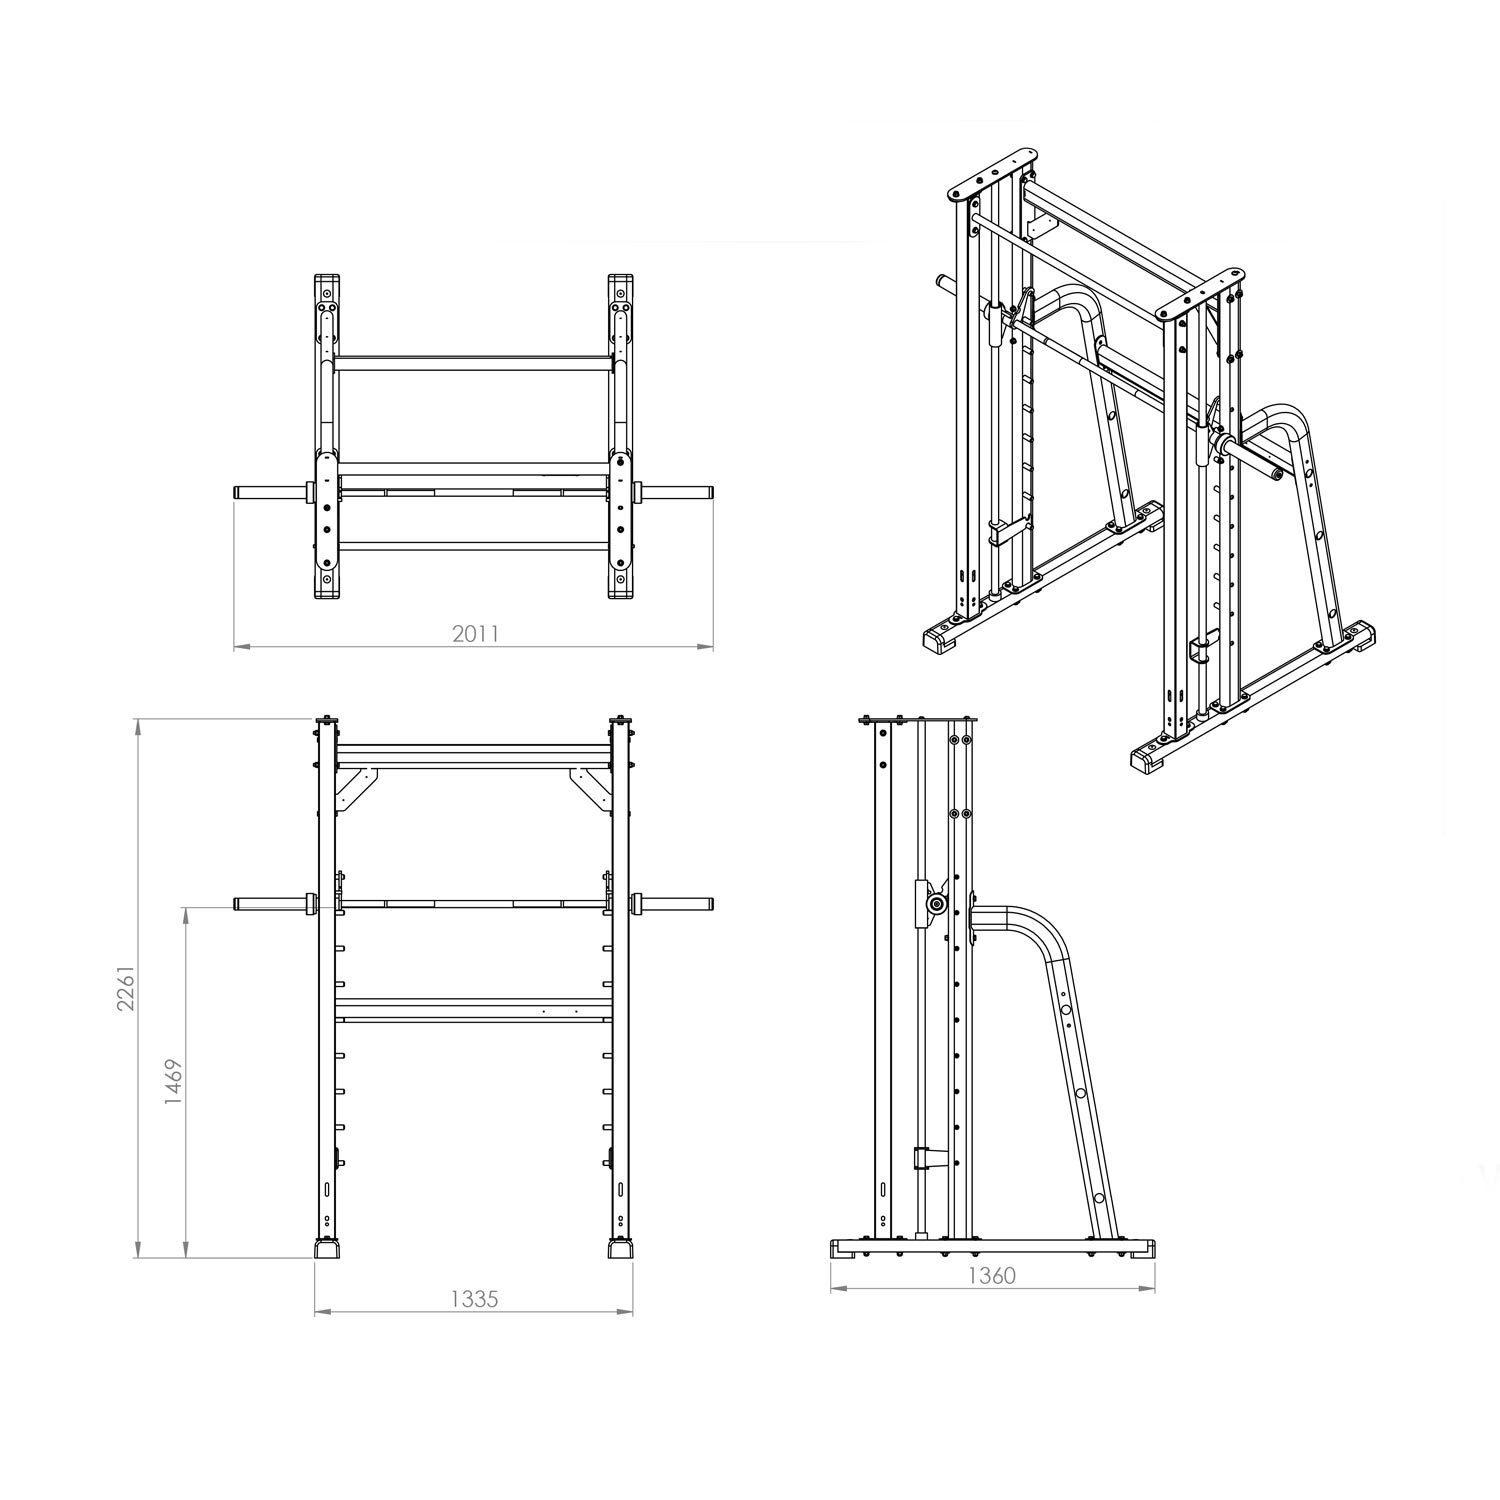 a diagram and dimensions of a gym power rack with smith machine